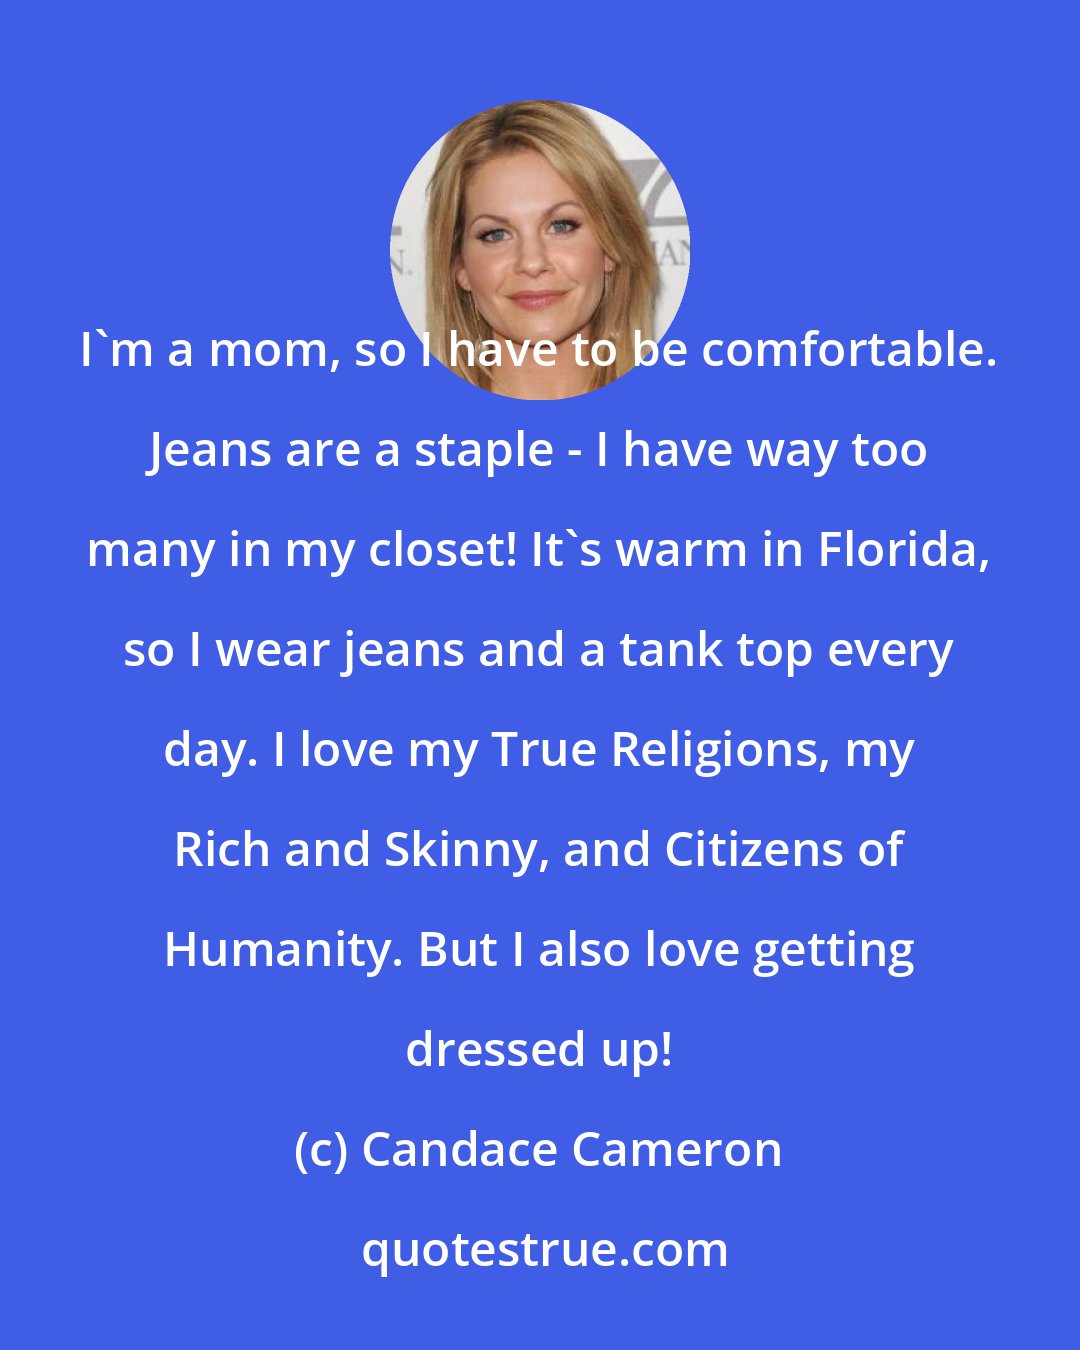 Candace Cameron: I'm a mom, so I have to be comfortable. Jeans are a staple - I have way too many in my closet! It's warm in Florida, so I wear jeans and a tank top every day. I love my True Religions, my Rich and Skinny, and Citizens of Humanity. But I also love getting dressed up!